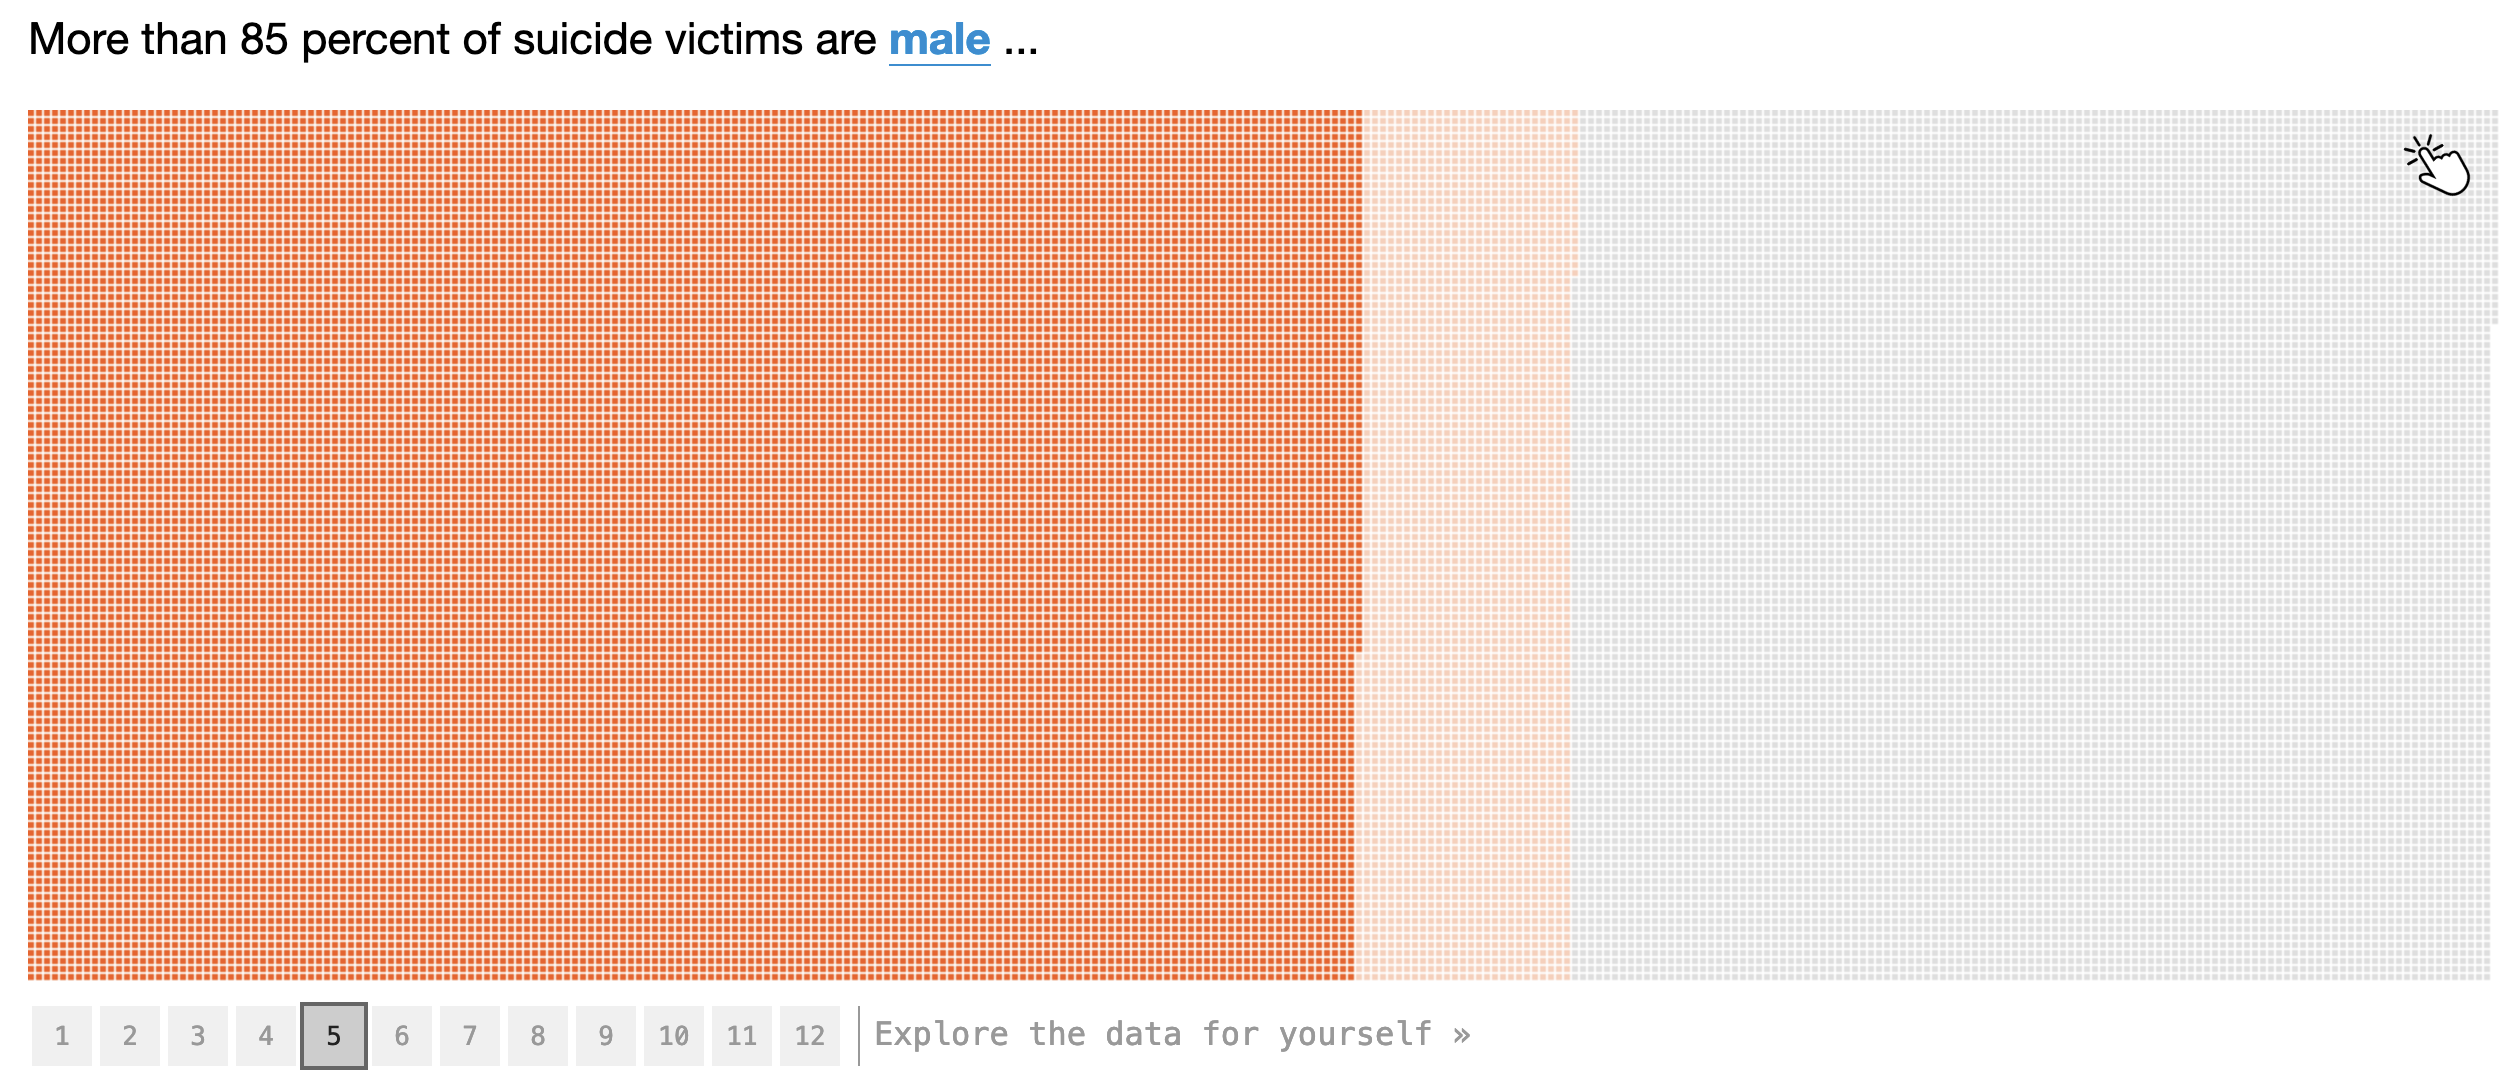 Screenshot of an interactive visualisation. The navigation shows that the current slide is slide 5 of 12, with title saying 'More than 85 percent of suicide victims are male'